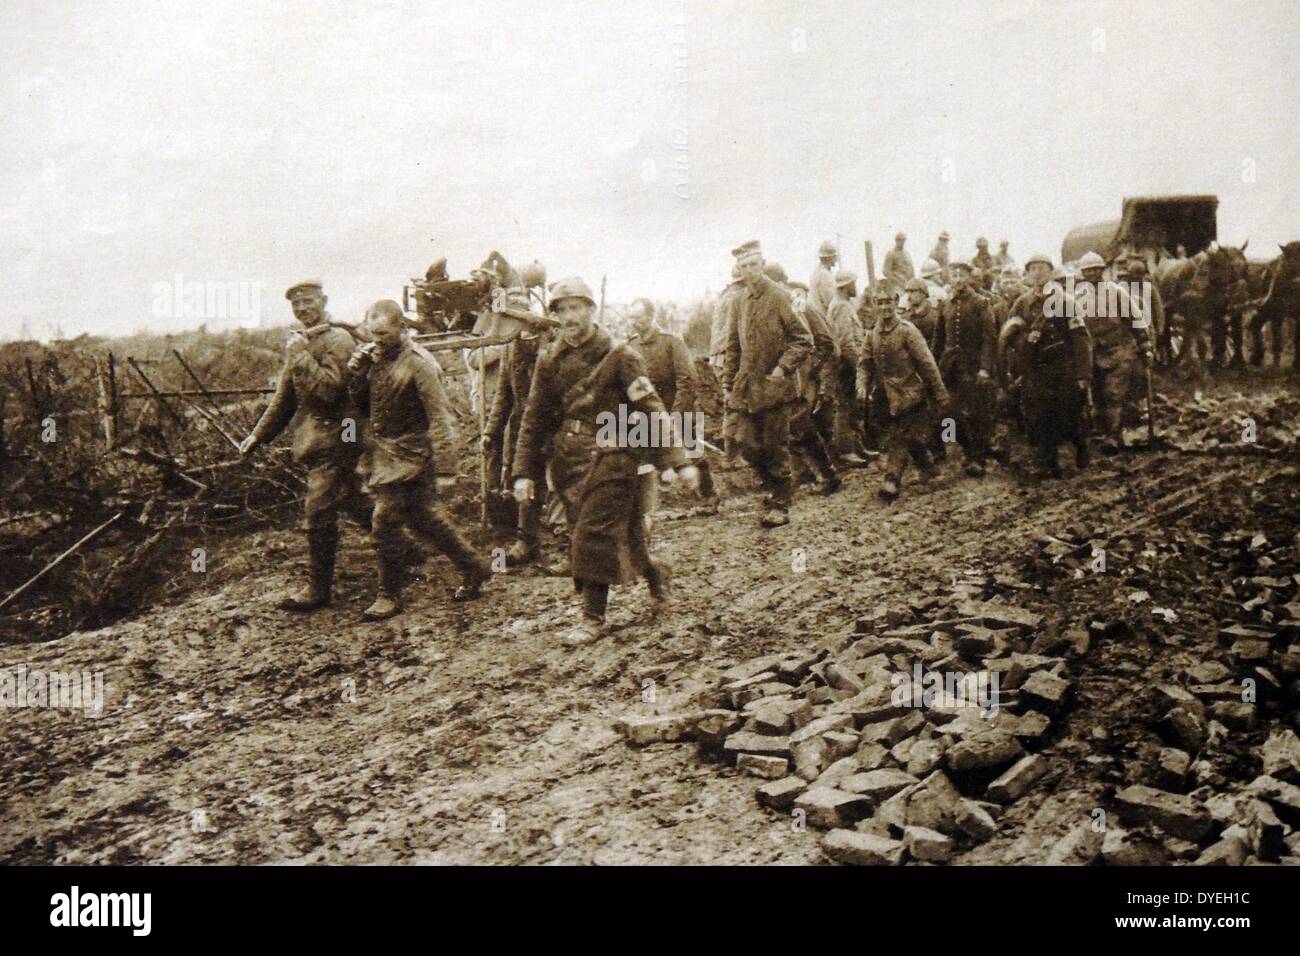 German prisoners of war captured by French forces during World War 1 - July 1916. Stock Photo